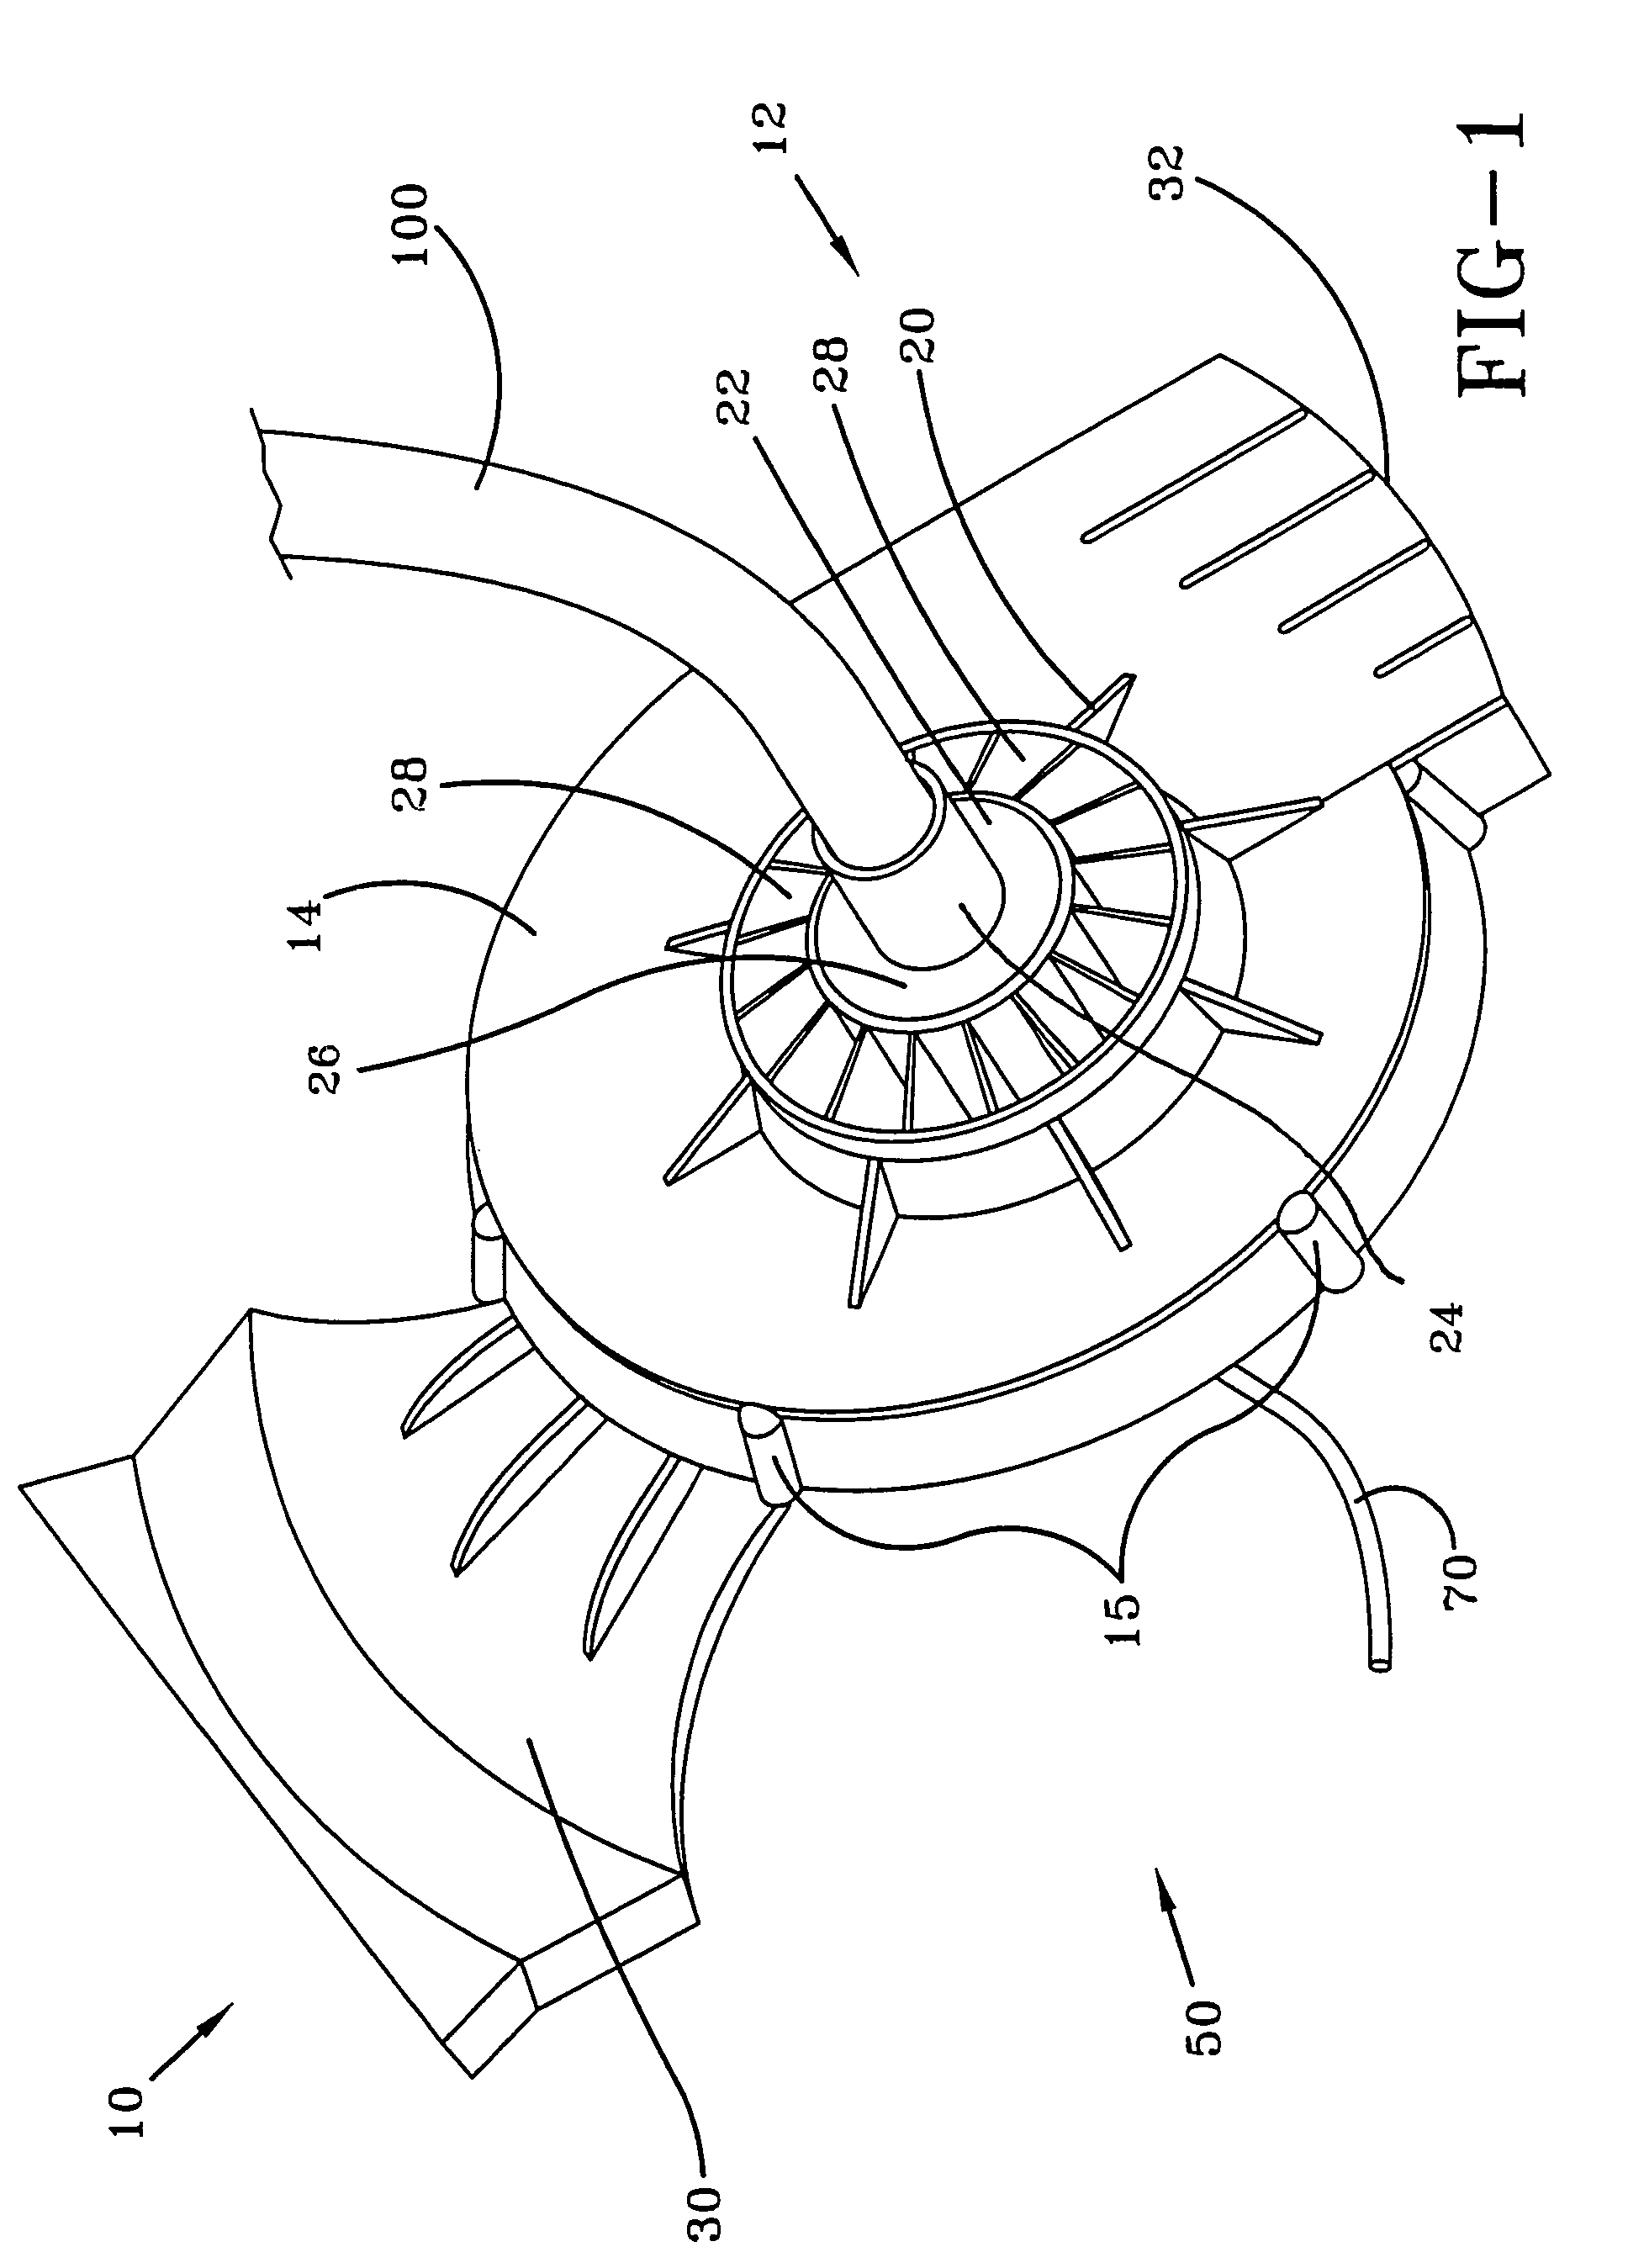 Combination blower assembly and string trimmer